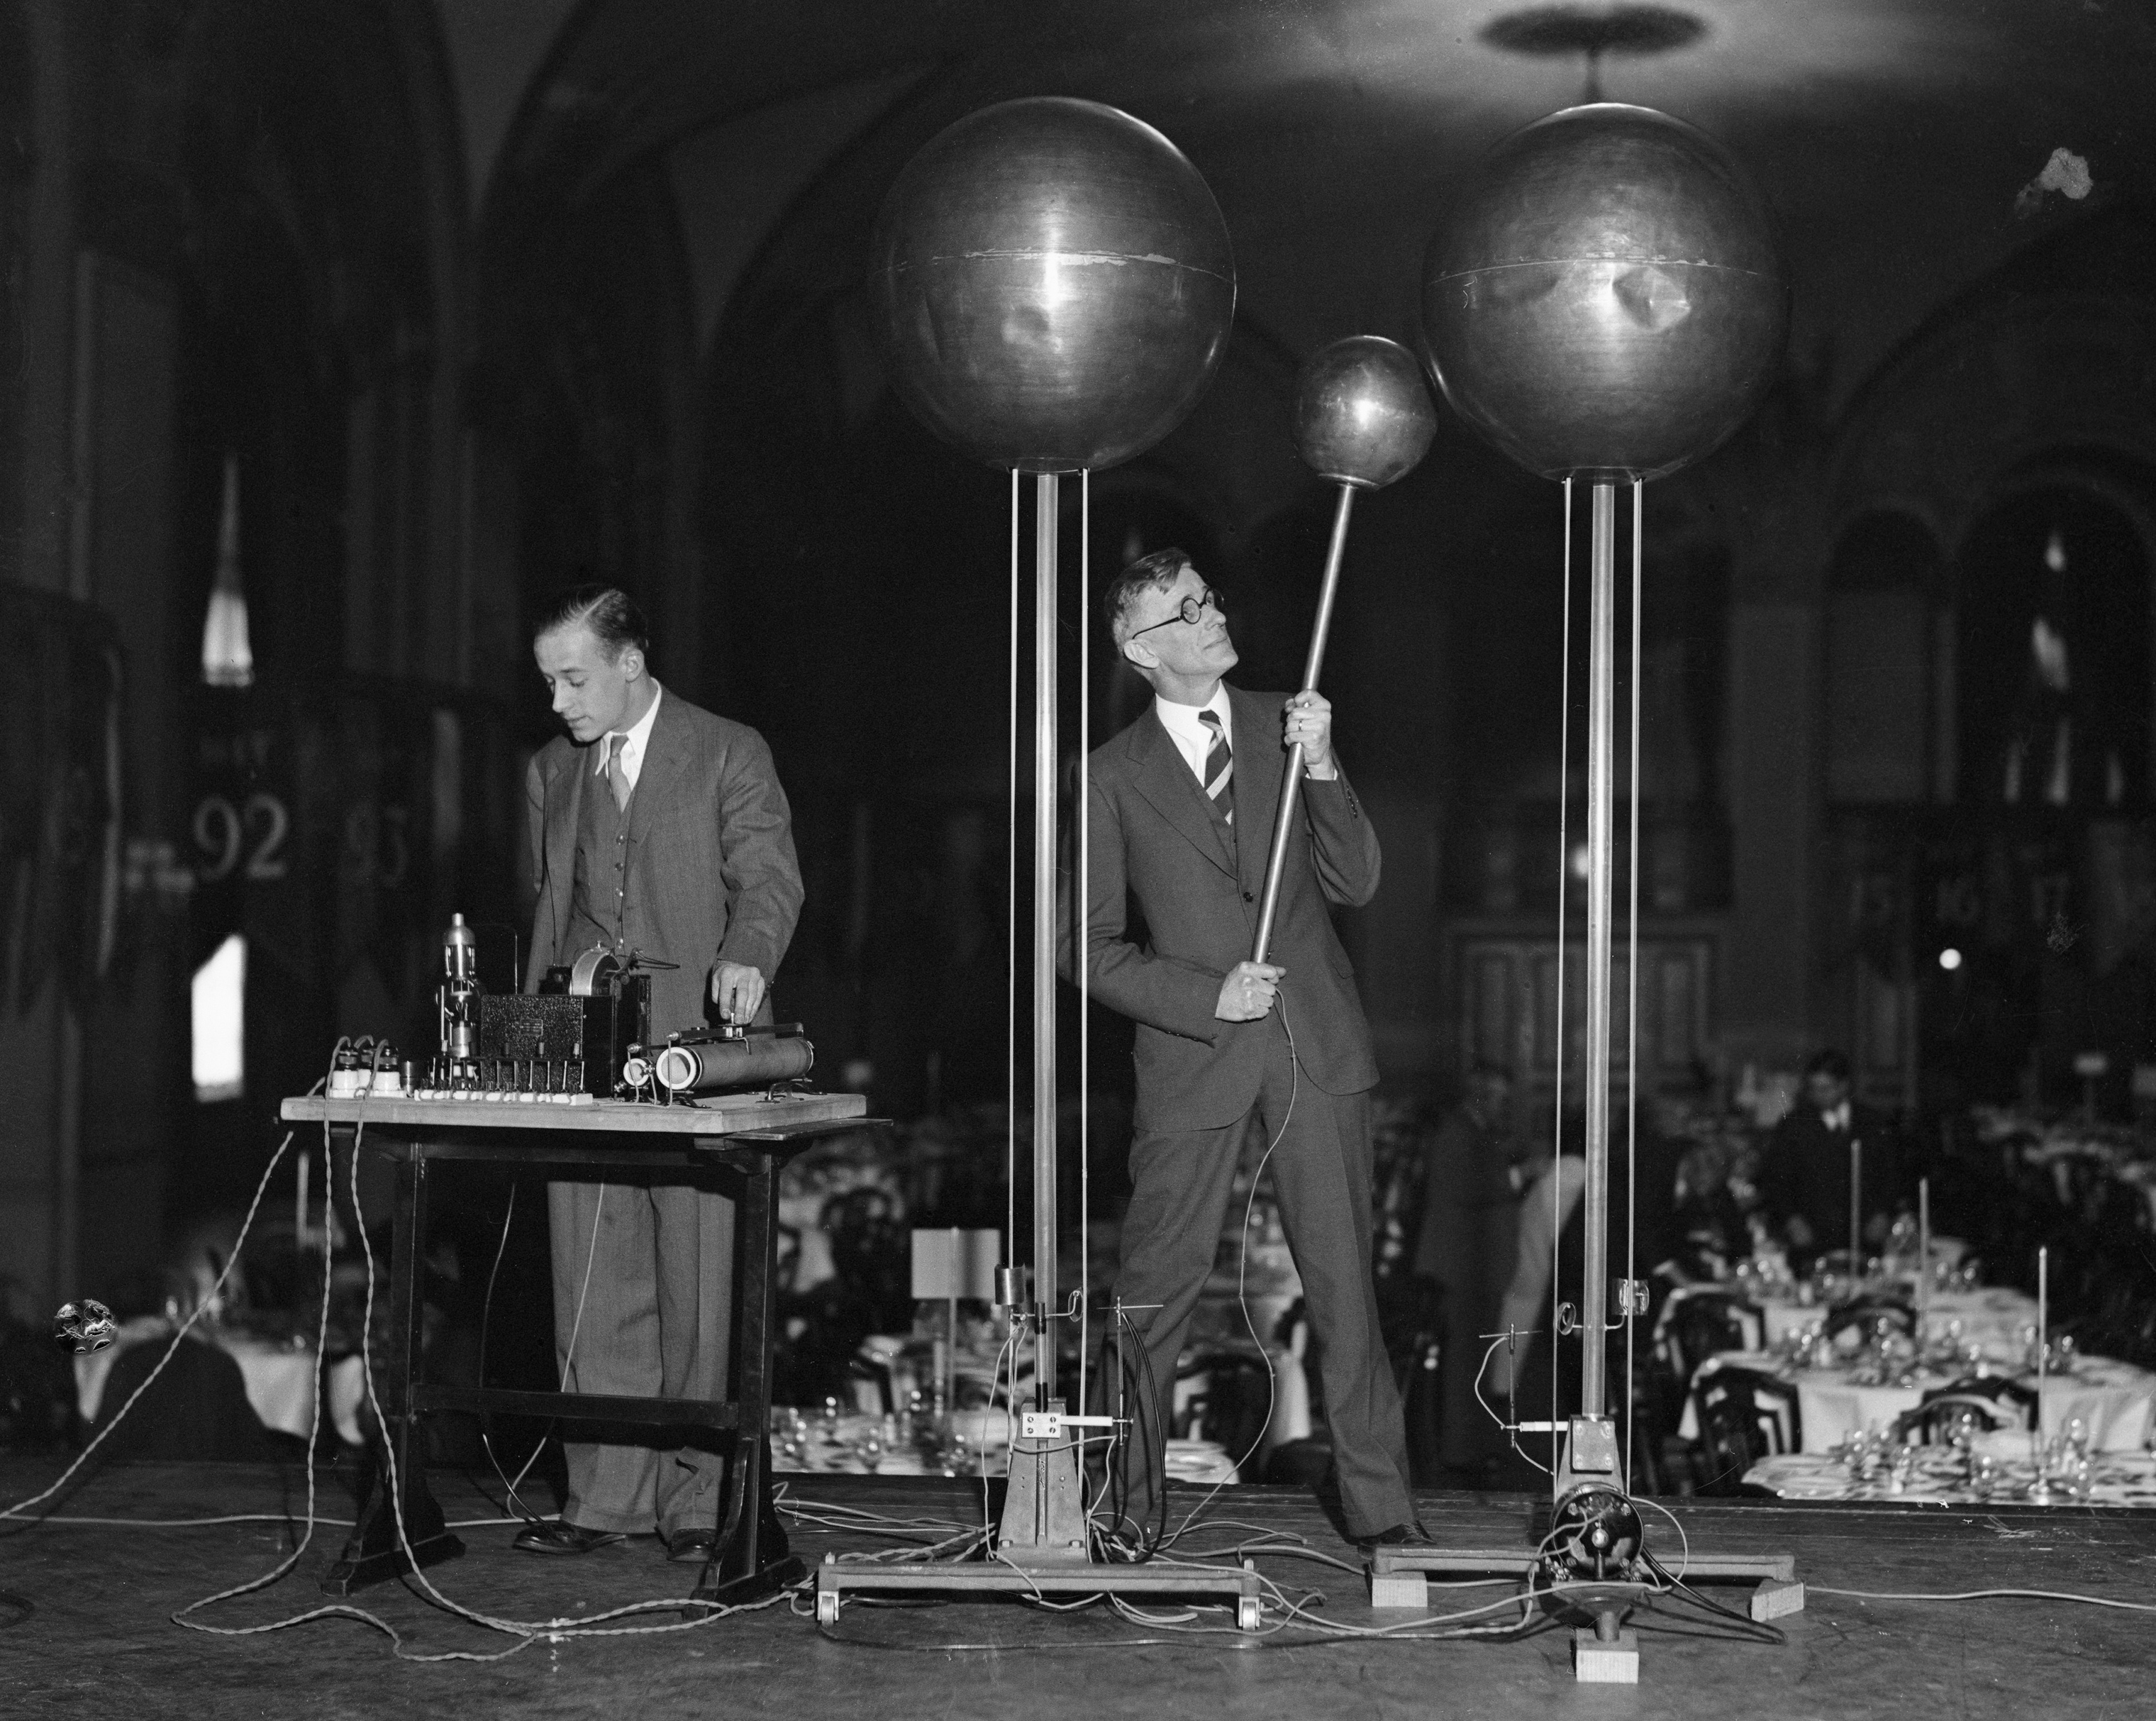 Dr. Vannevar Bush, right, and E.S. Lamar demonstrate the Dr. Robert Van De Graf 1,500,000 volt generator at the annual Dinner of Technology Alumni in the Copley Plaza. The generator is said to be capable of producing a shock of 10,000,000 volts. (Bettmann Archive/Getty Images)